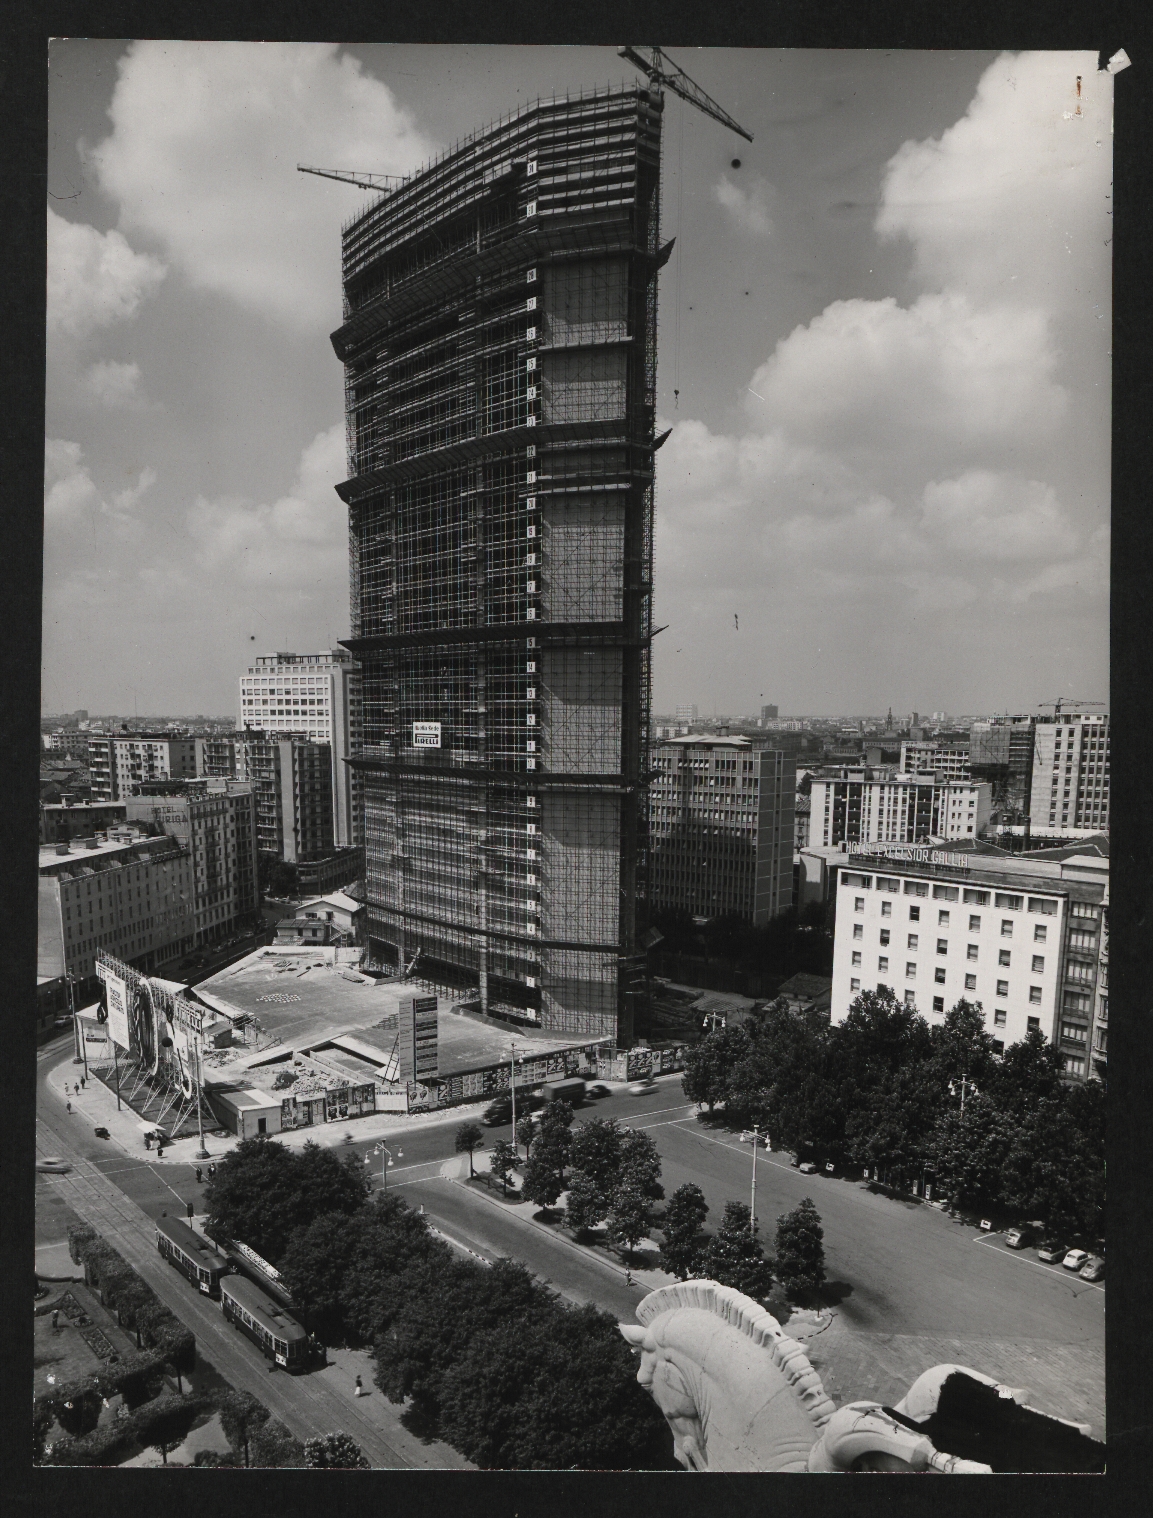 Black and white photo of the Pirelli Tower under construction